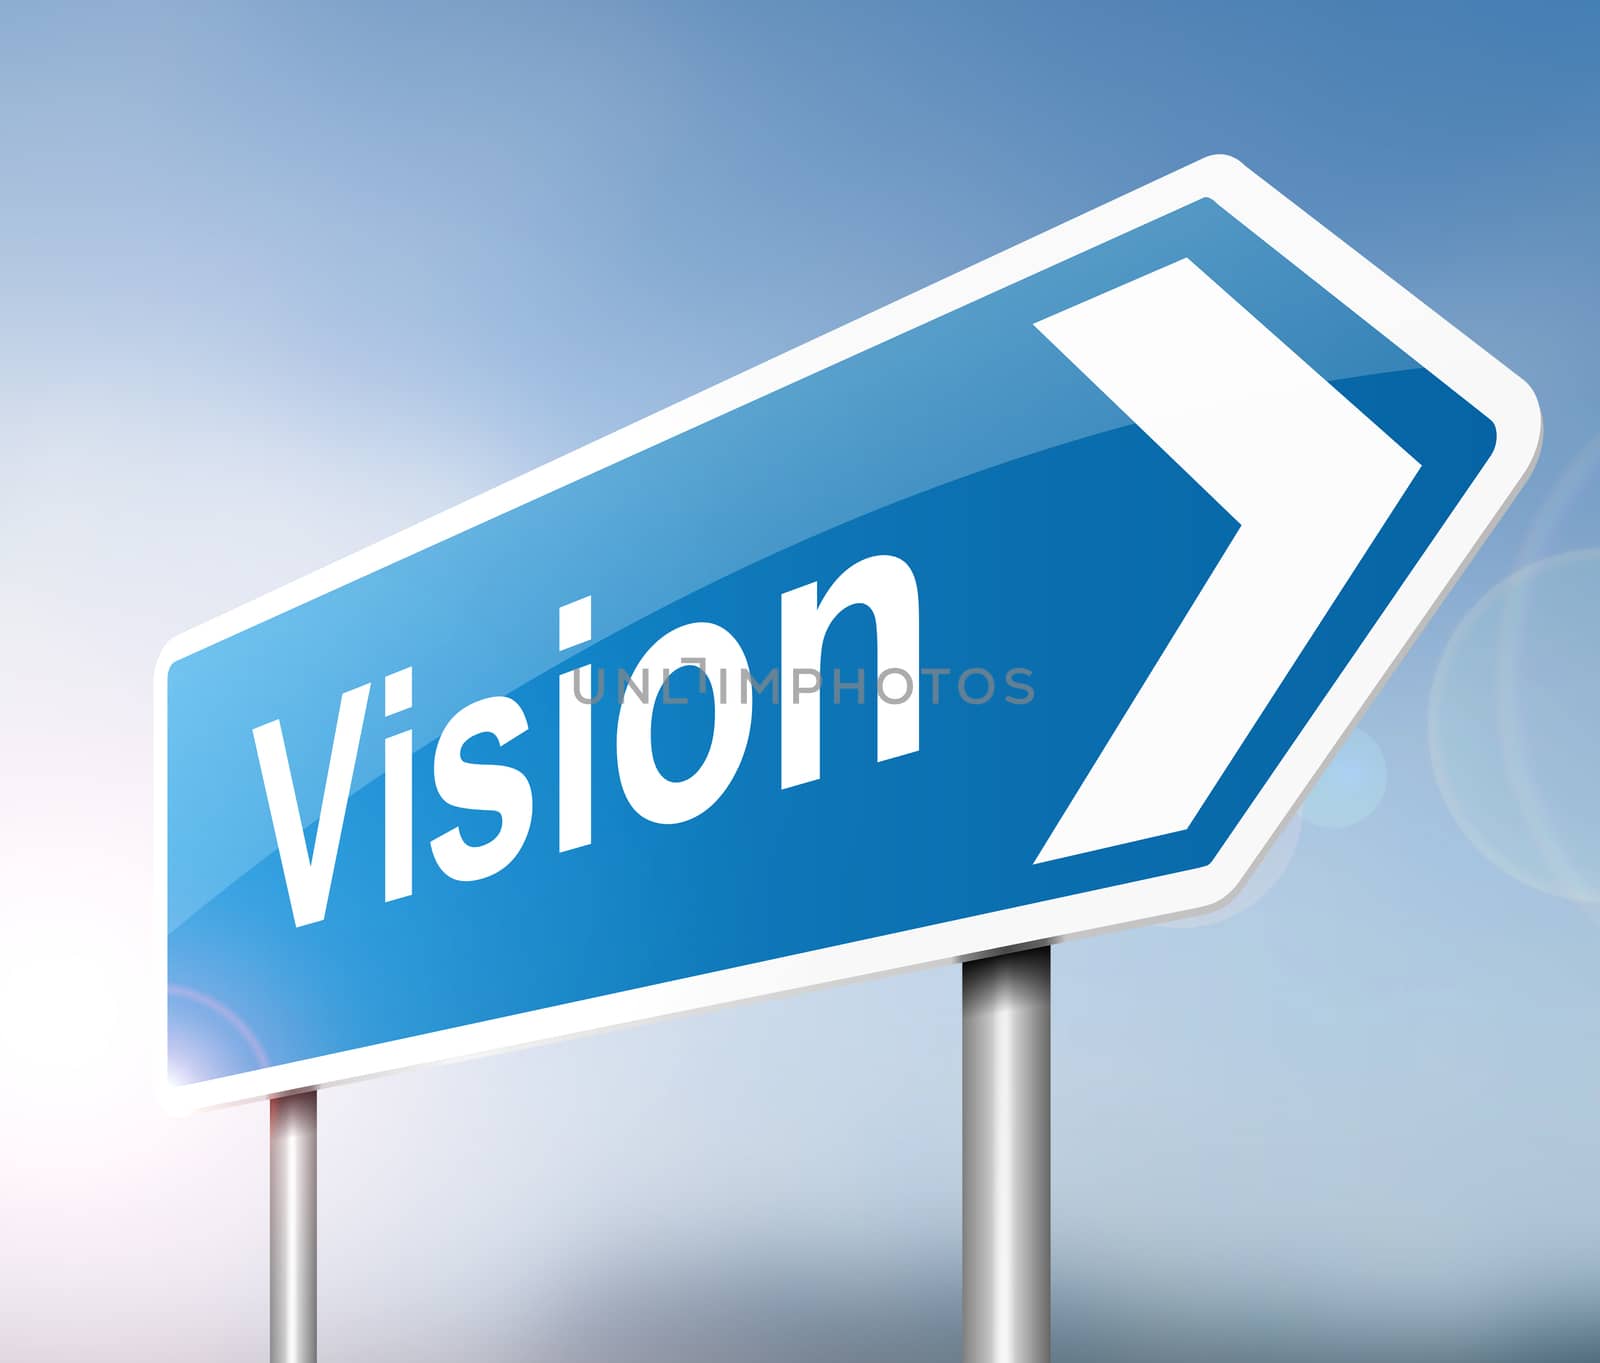 Illustration depicting a sign with a vision concept.